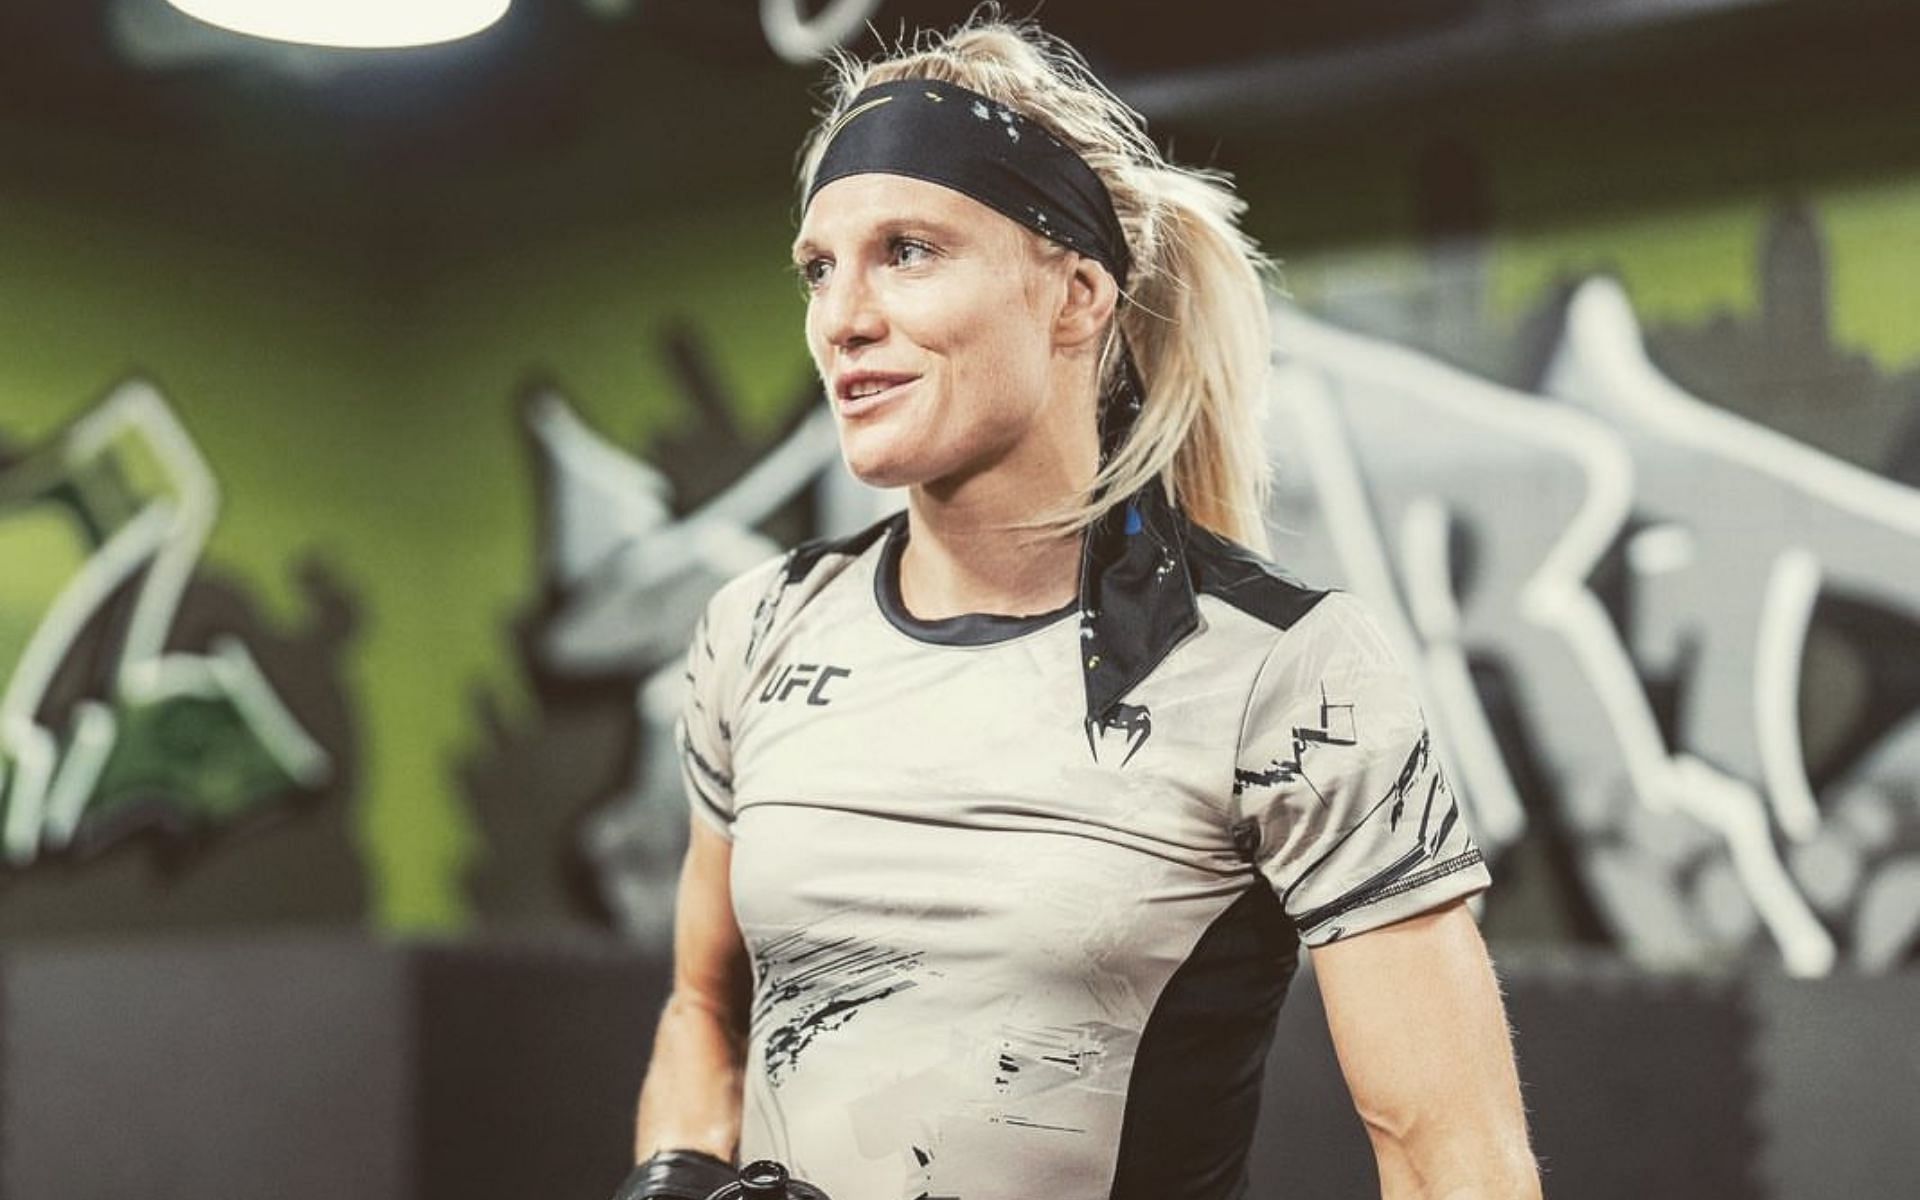 Manon Fiorot is heralded as one of the best flyweights in the sport of mixed martial arts today [Image courtesy: @manonfiorot_mma on Instagram]